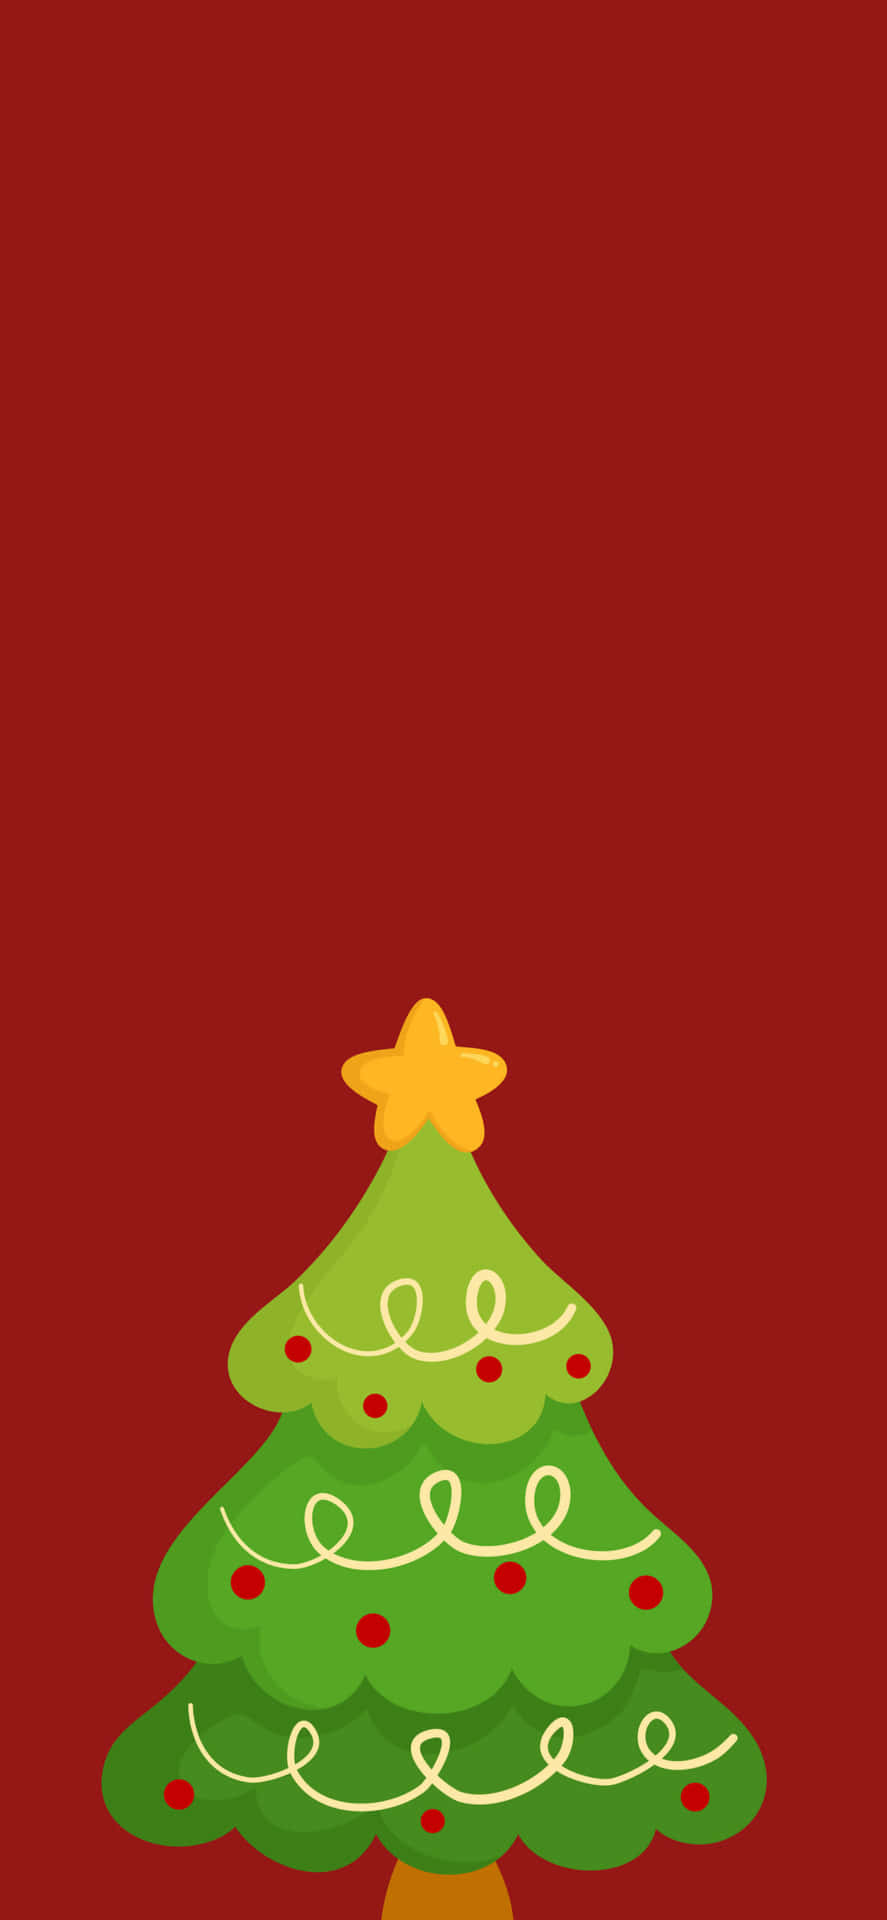 A Christmas Tree On A Red Background